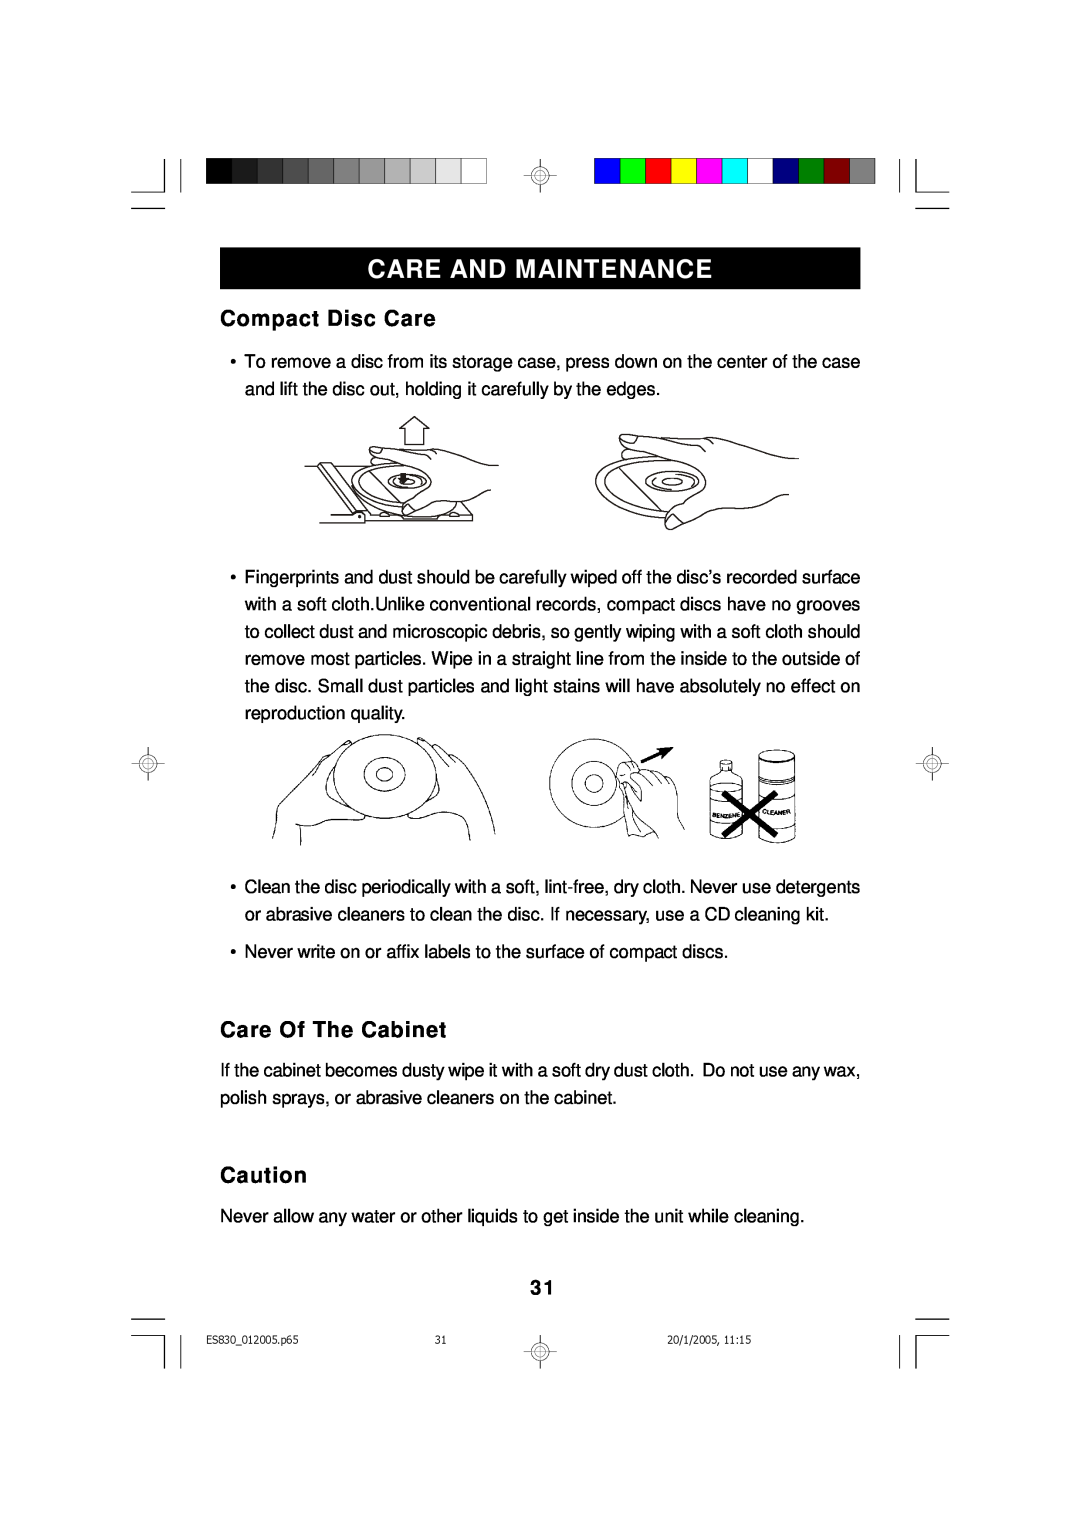 Emerson ES830 owner manual Care And Maintenance, Compact Disc Care, Care Of The Cabinet 